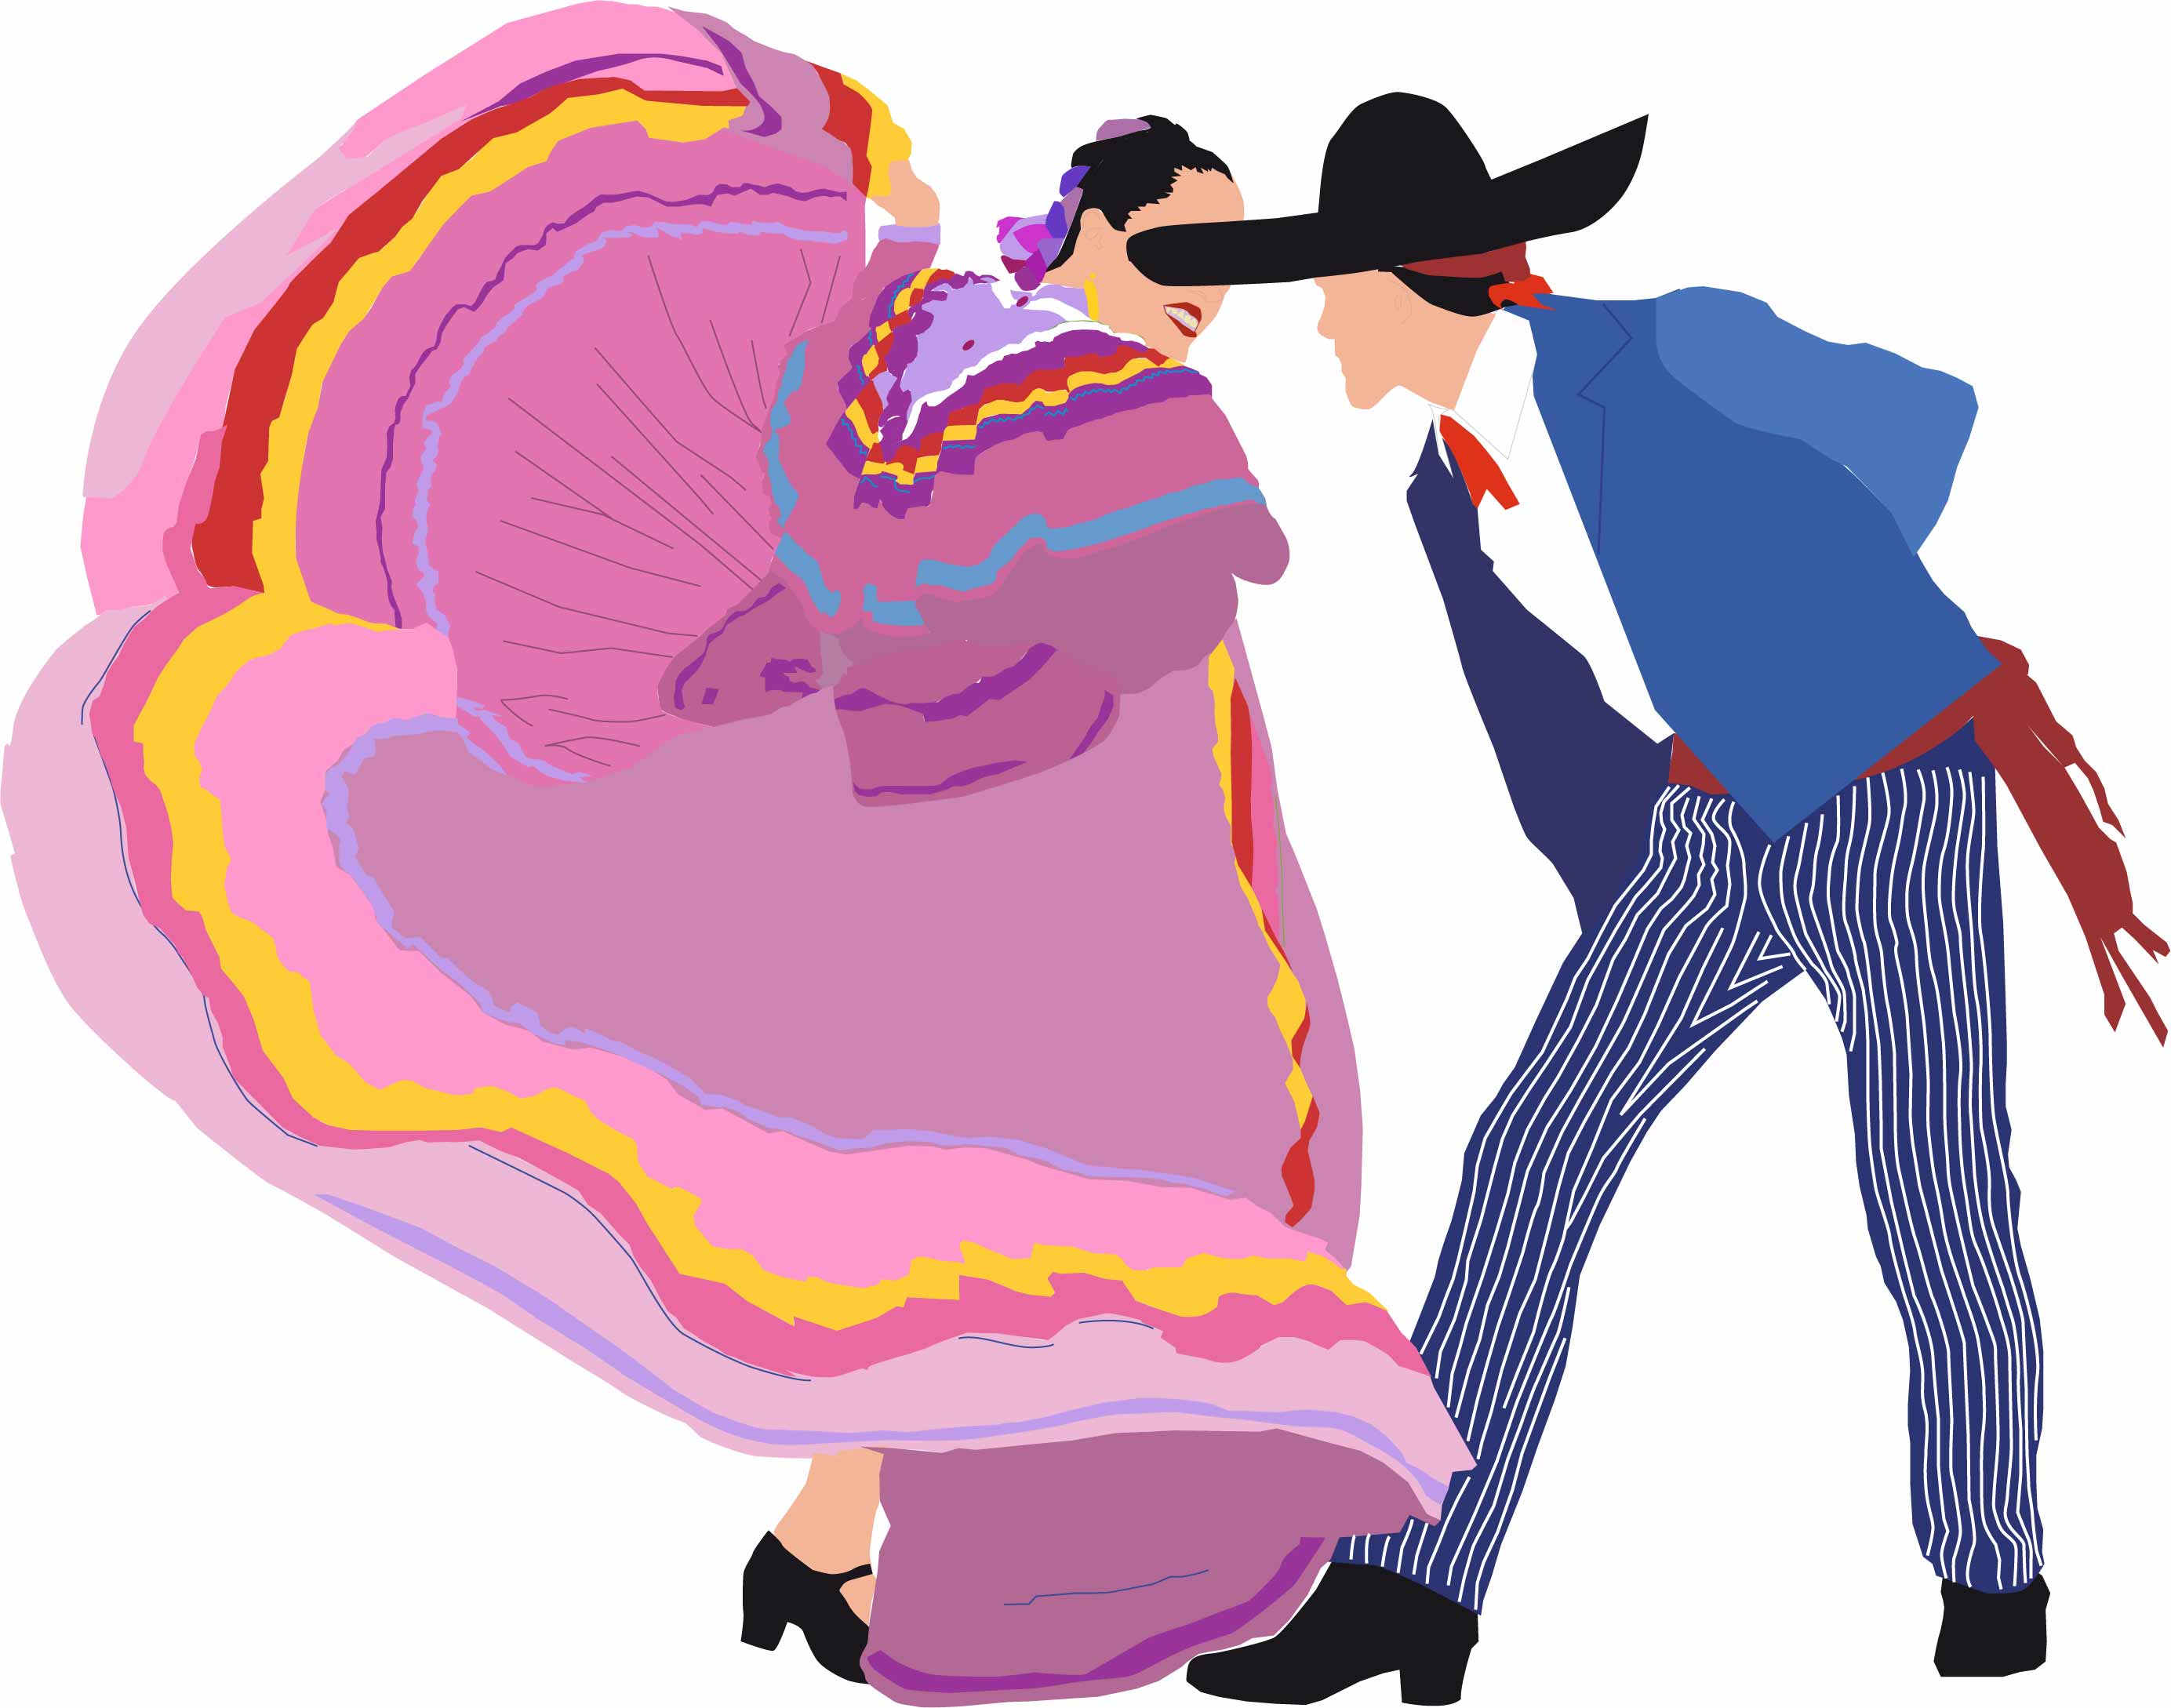 Folklore Mexican Dance By Mirandadesings On Deviantart